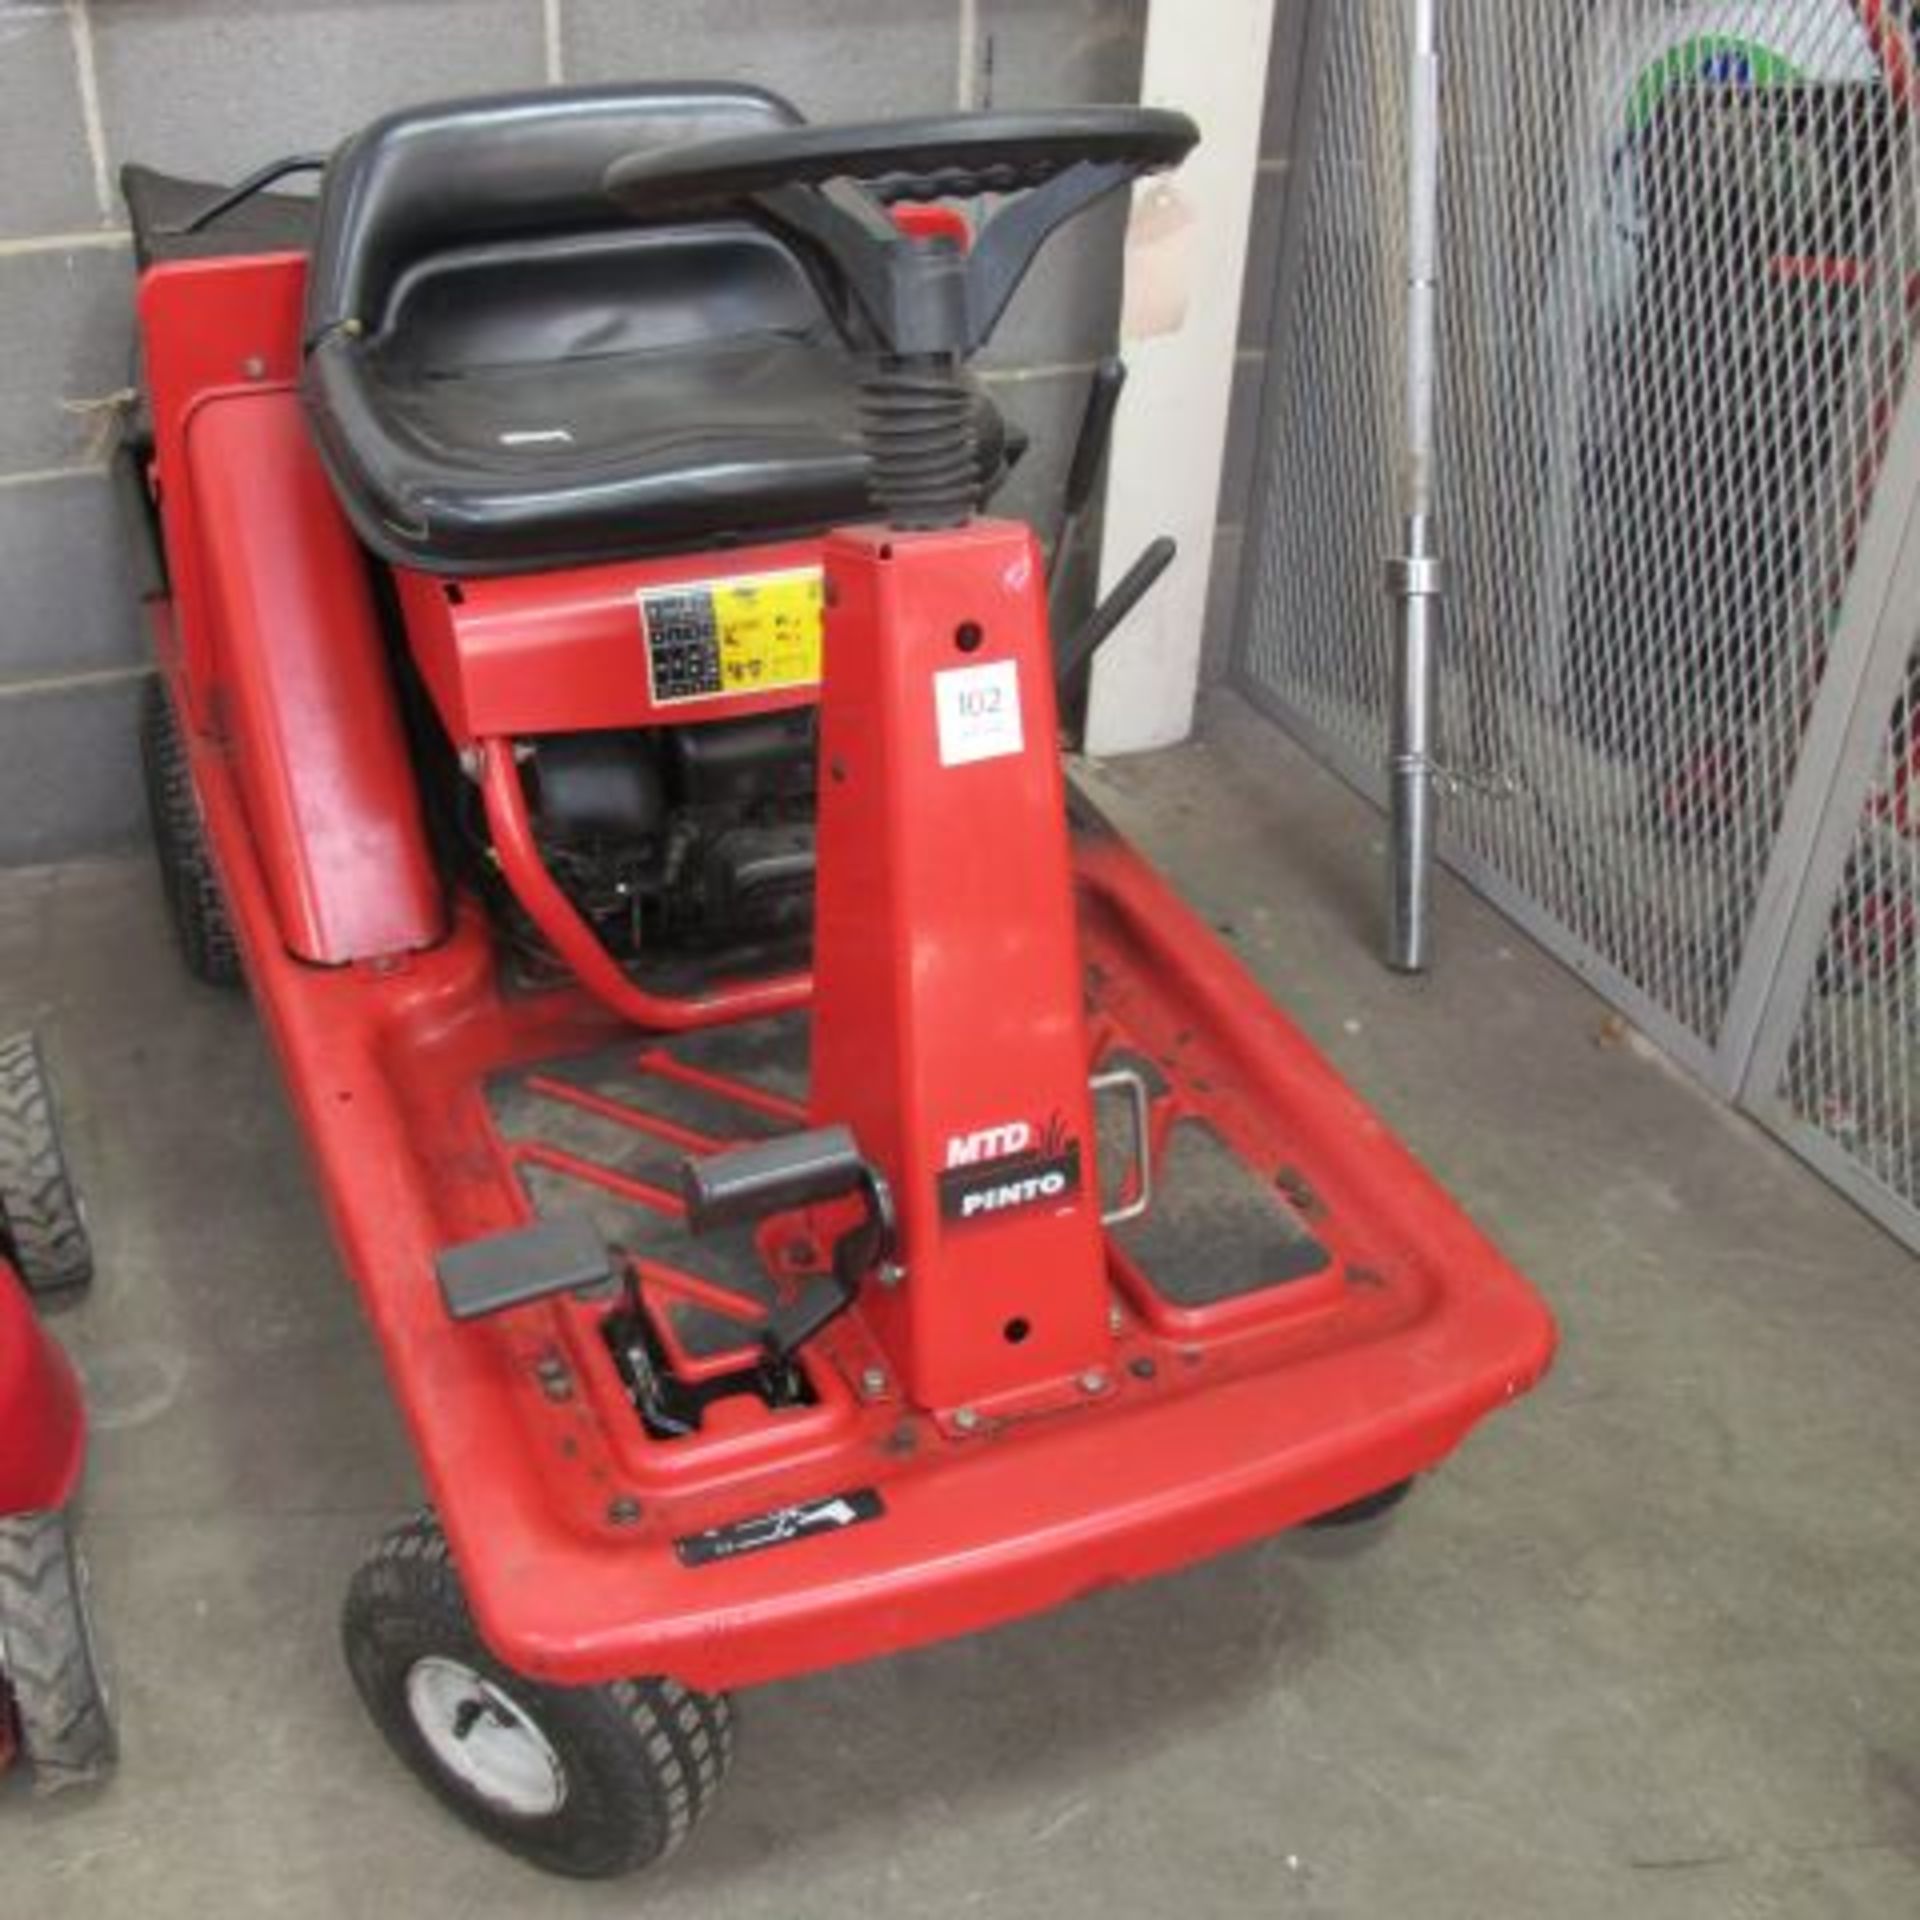 An MTD Pinto Ride On Mower. Please note there is a £10 plus VAT Lift Out Fee on this lot